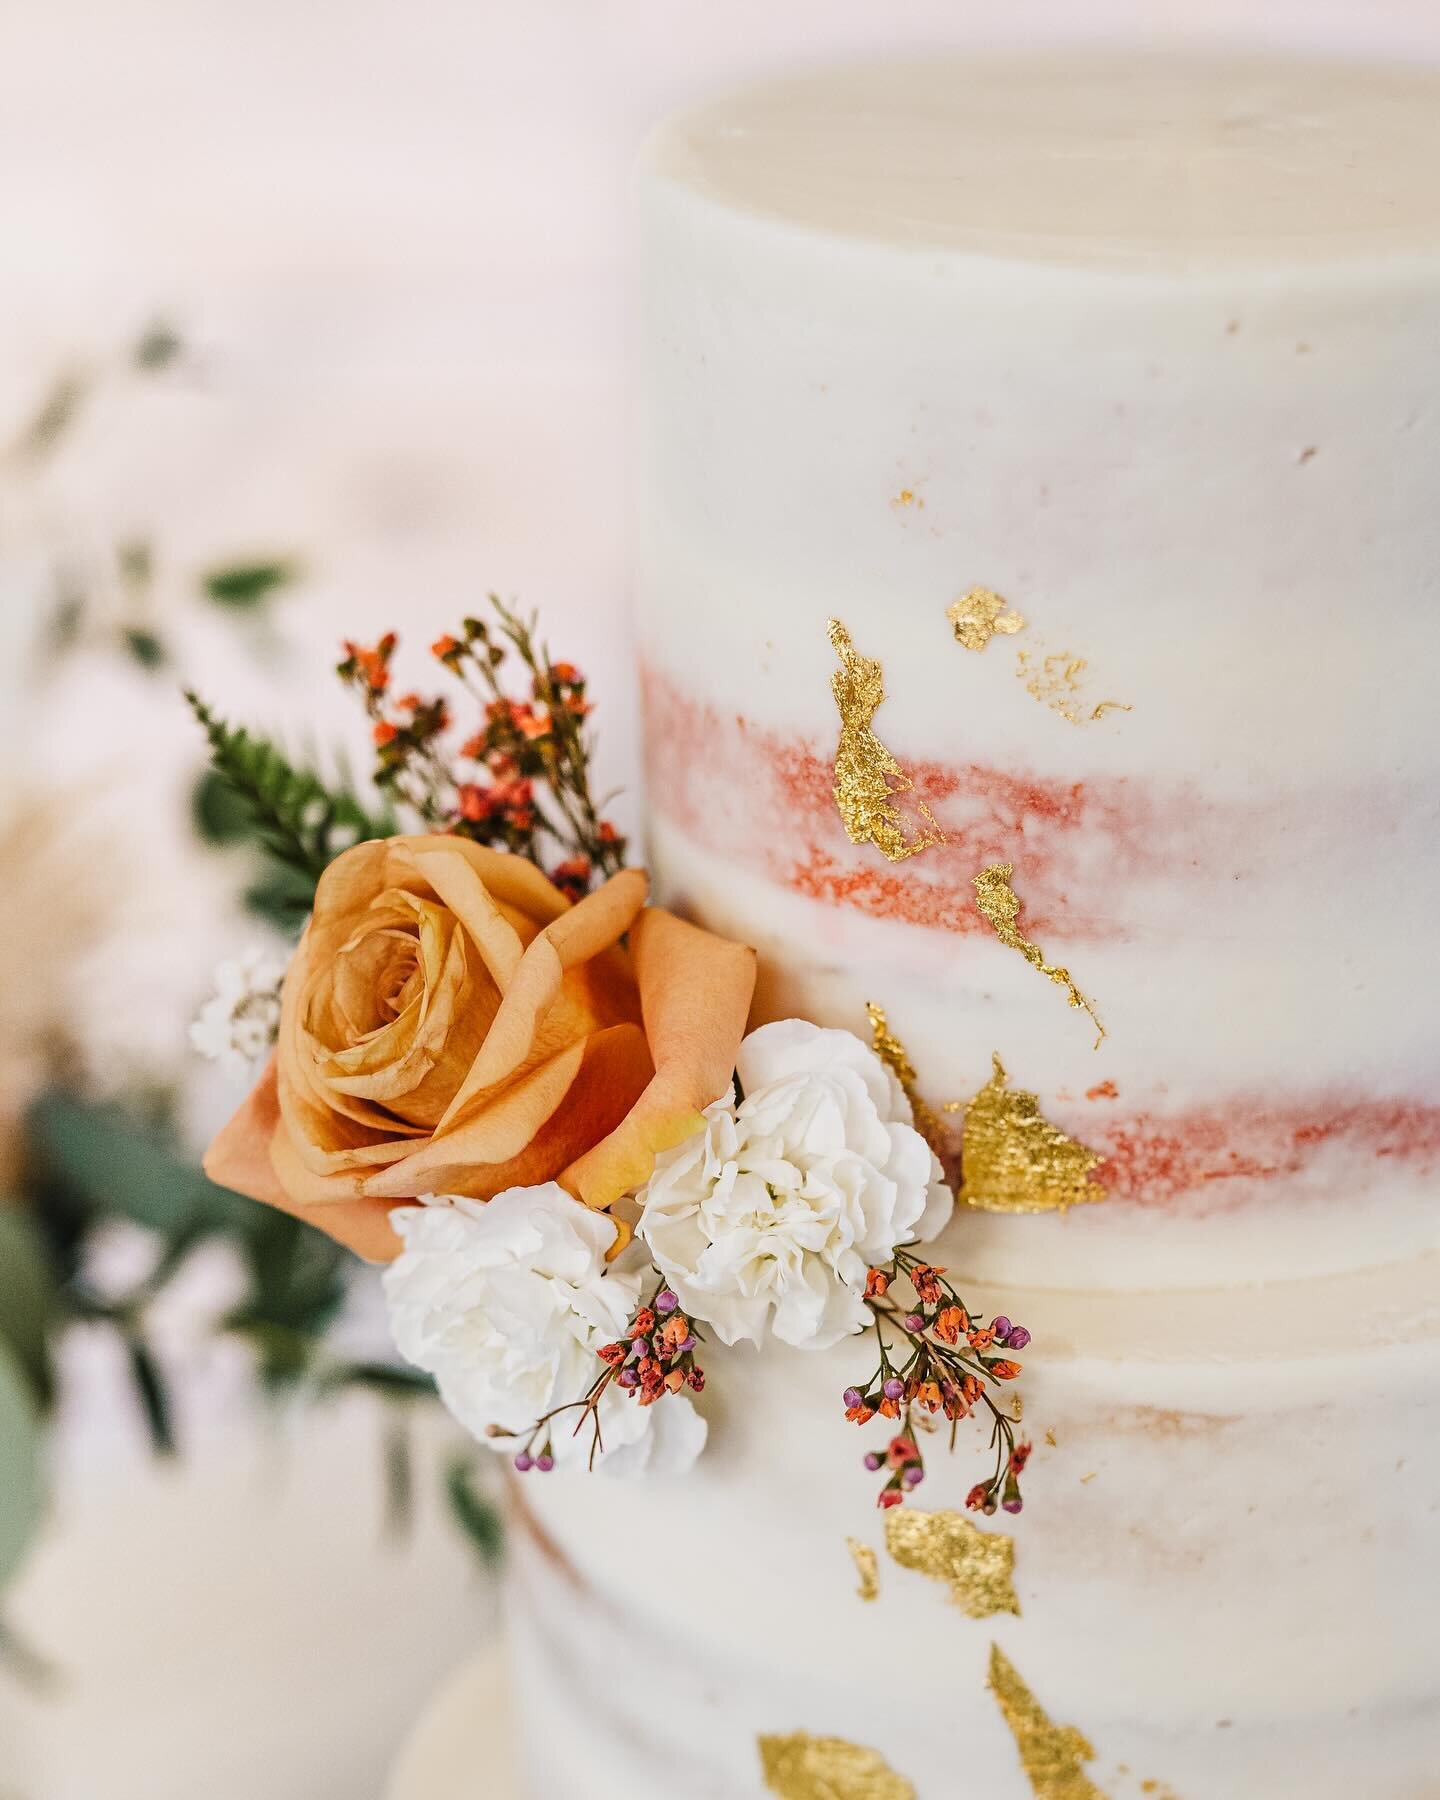 Its the Gold Flakes for me ✨🤩

This was such a beautiful ans delicious cake by @cakesbyangelava 🙌🏼🎂

Venue: @cedaroaksweddings 
Planner: @julierupertevents 
Florist: @rosefieldfarm 
Cake: @cakesbyangelava